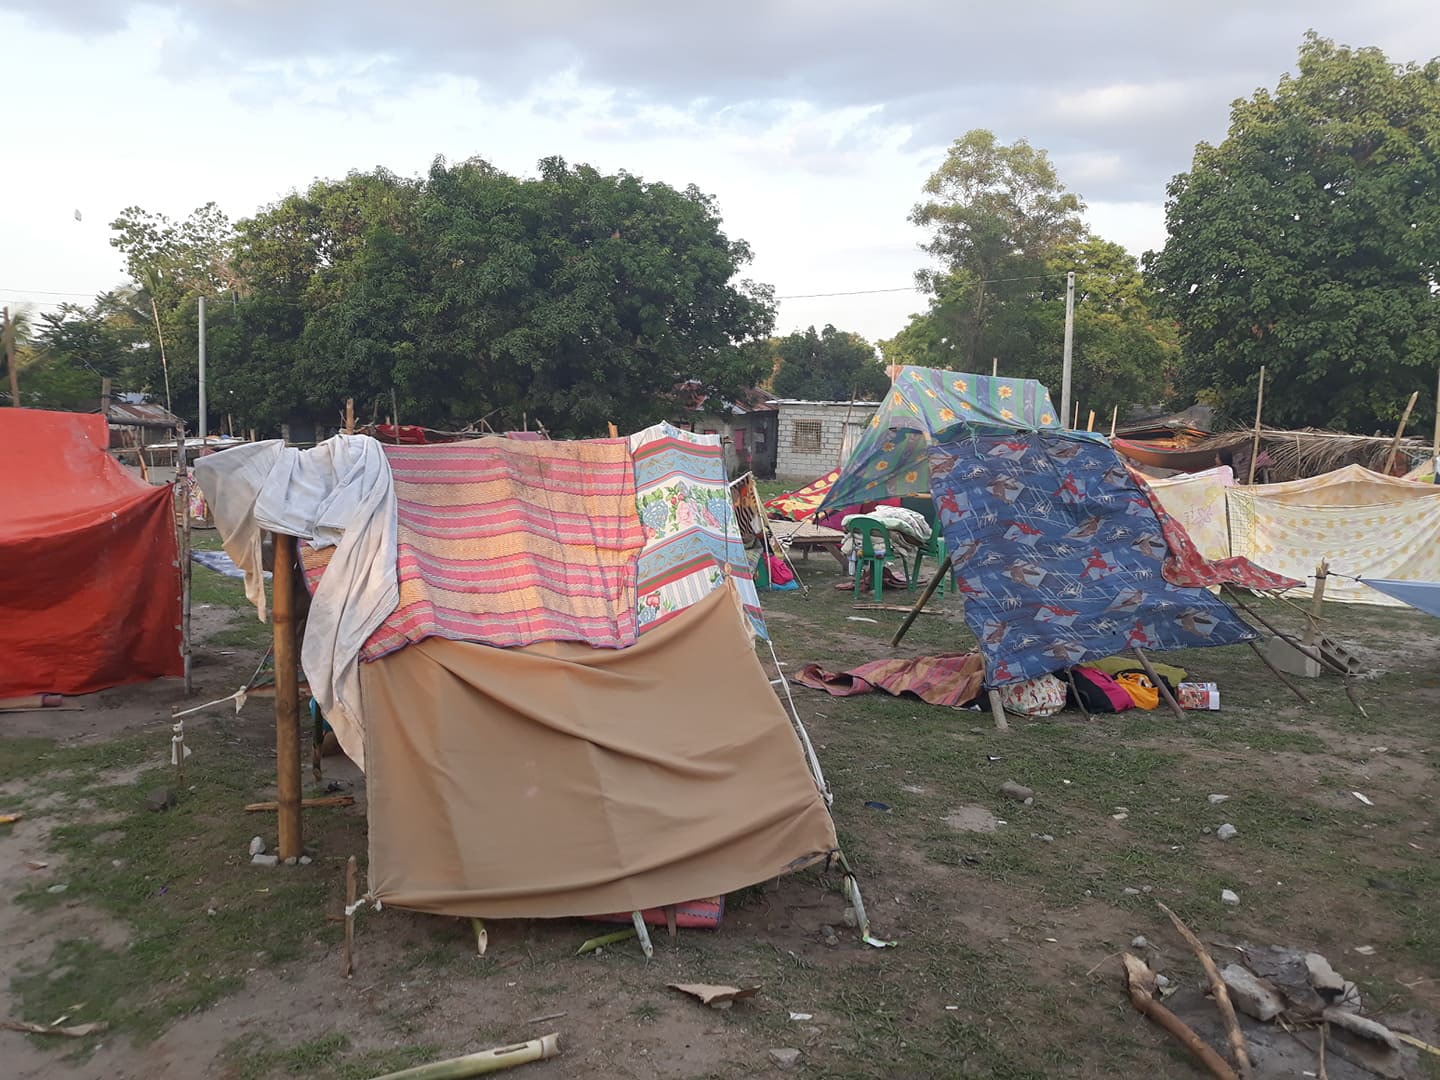 Earthquake evacuees take refuge in tents in Porac, Philippines, in the Pampanga province northwest of Manila. The indigenous Aetas built the tent city after the eruption of Mt. Pinatubo in 1991. Photo by Rommuel S. Flores.